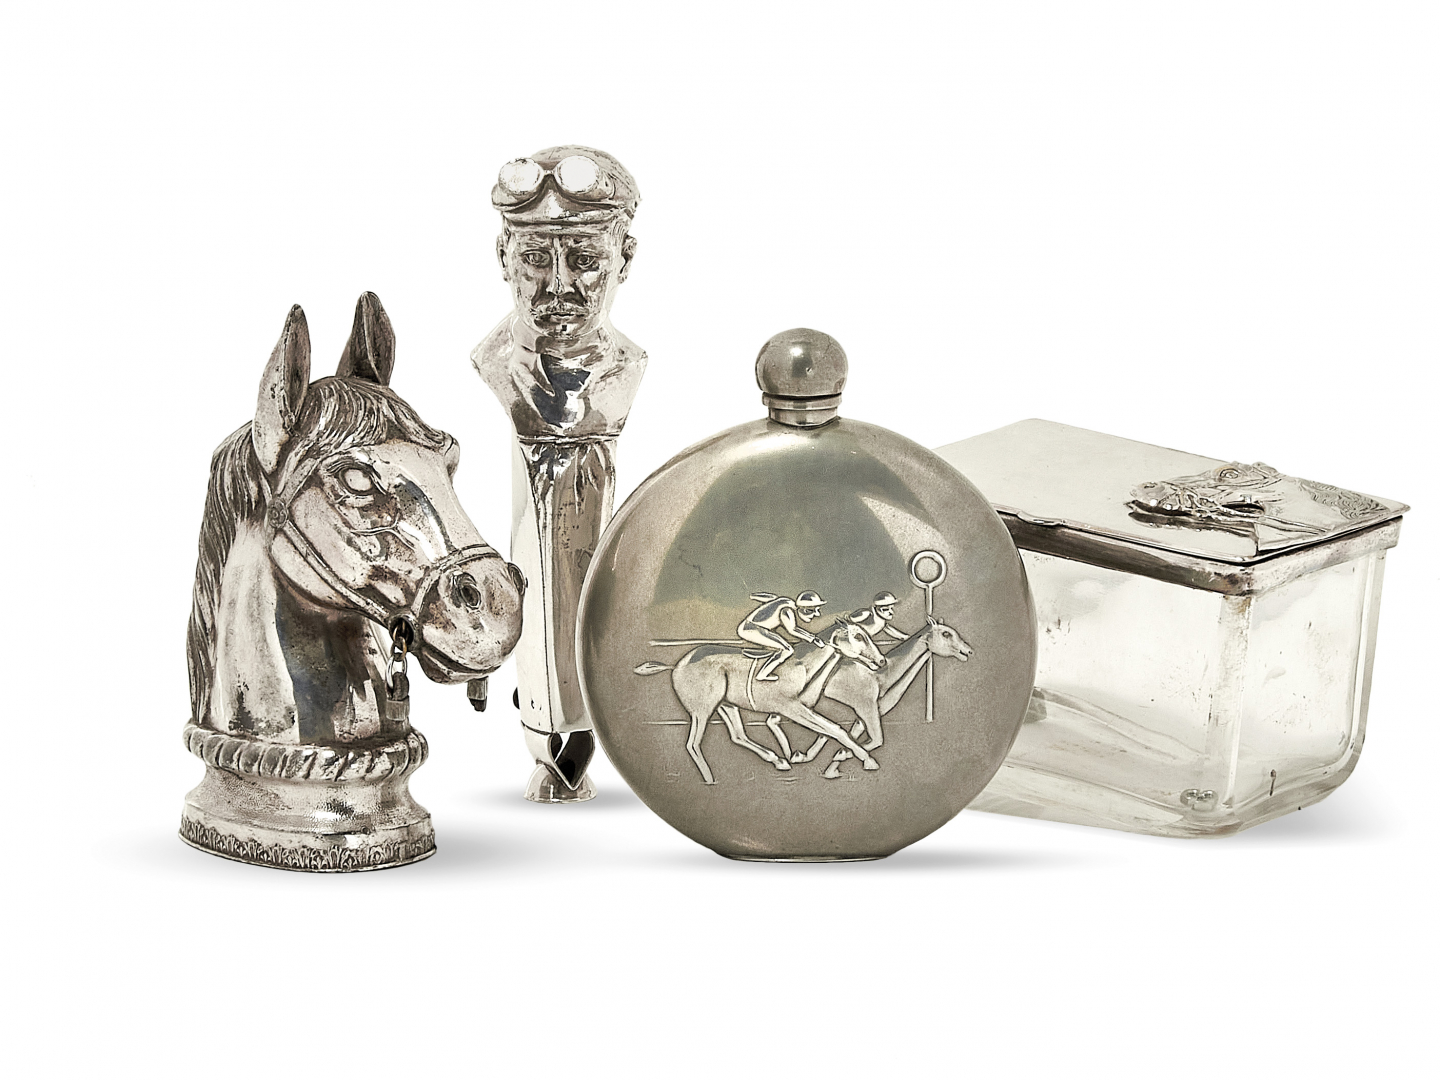 Miscellaneous group of silver plated objects 20th Century Miscellaneous...